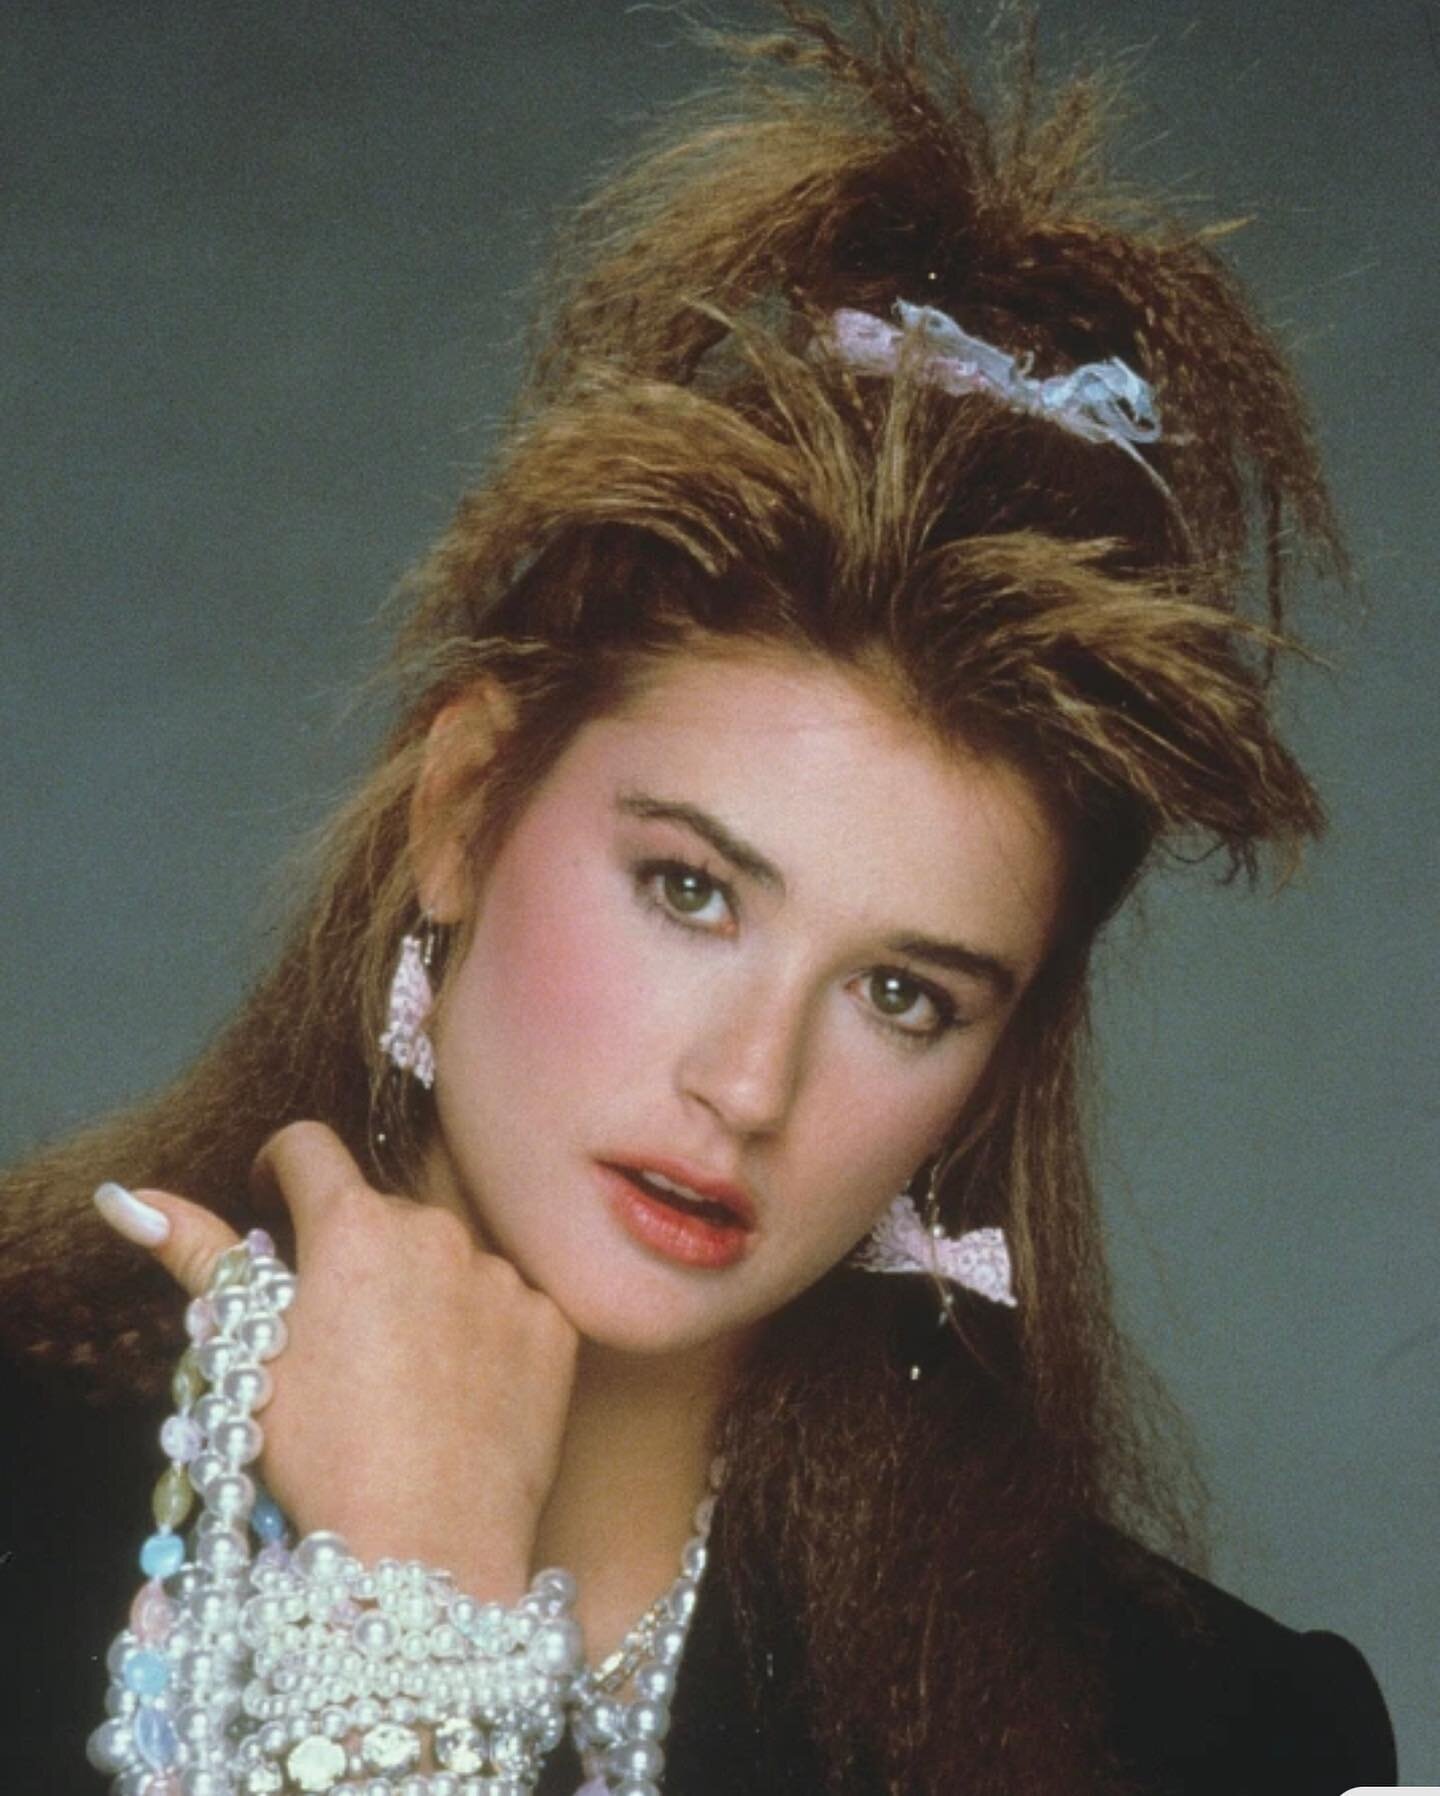 In 1984, the year St. Elmo&rsquo;s Fire was filming, Madonna dropped her second album, Like A Virgin. Already a force in music and fashion, her look served as a reference for Demi Moore&rsquo;s character, Jules. Hairstylist K.G. Ramsey recalls direct